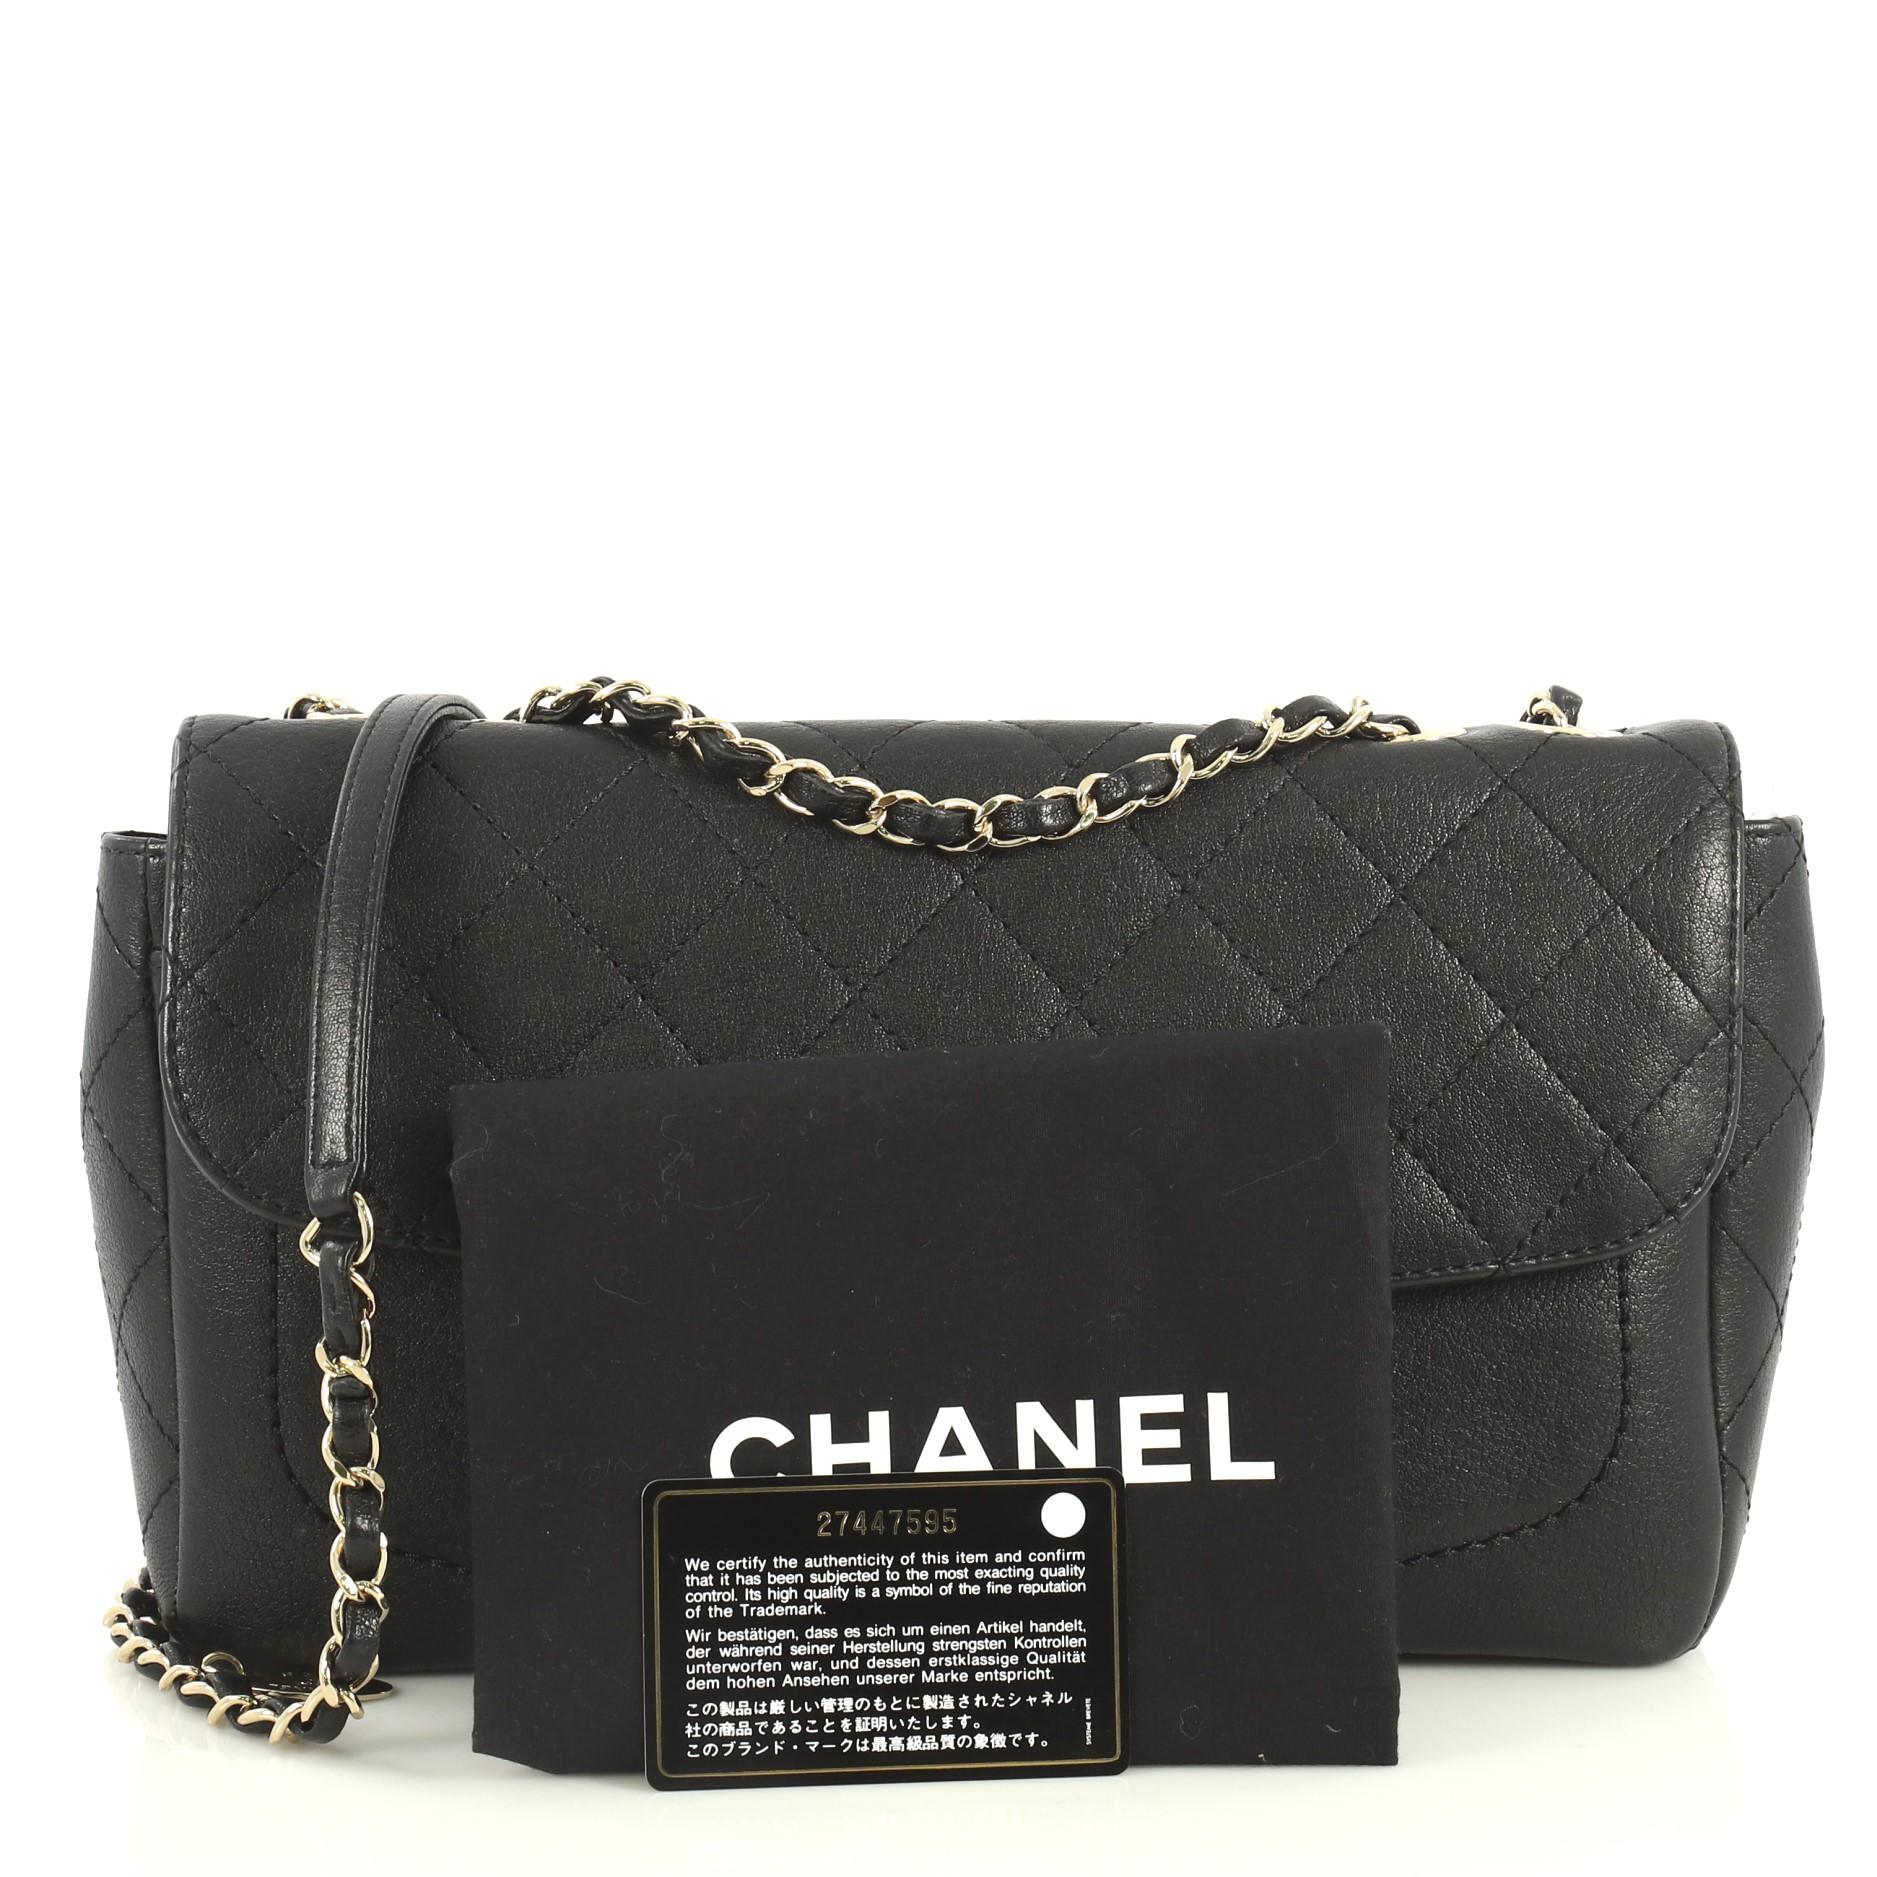 This Chanel Coco Curve Flap Messenger Quilted Goatskin Large, crafted from black quilted goatskin, features woven-in leather chain strap and gold-tone hardware. Its CC turn-lock closure opens to a black fabric interior with side zip pocket. Hologram